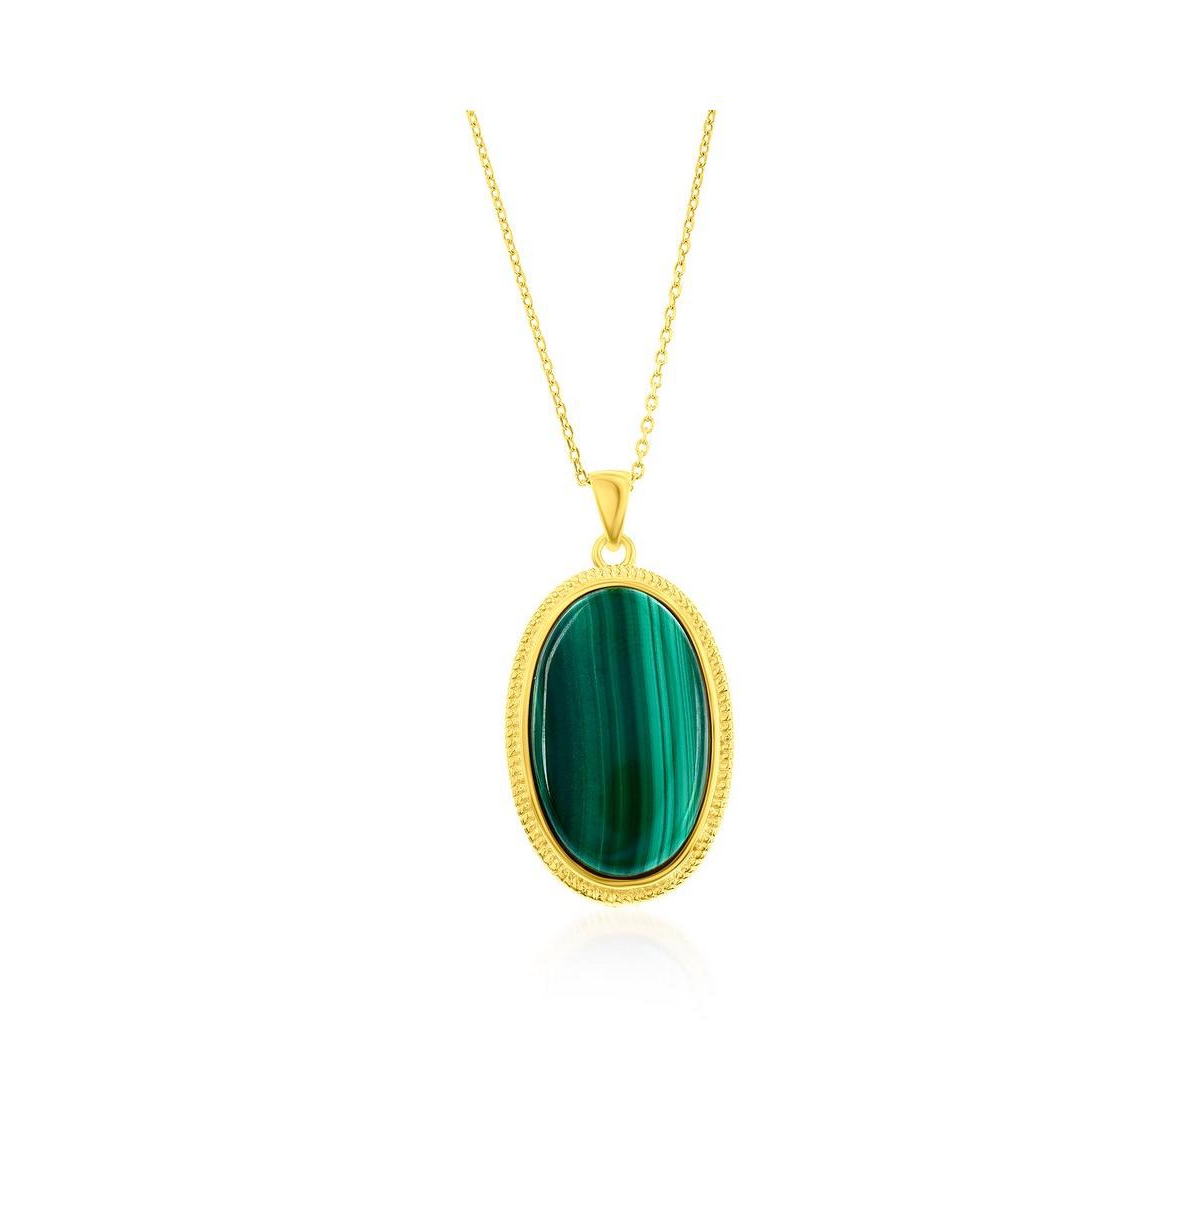 Sterling Silver or Gold plated over Sterling Silver Oval Malachite Beaded Border Pendant Necklace - Gold